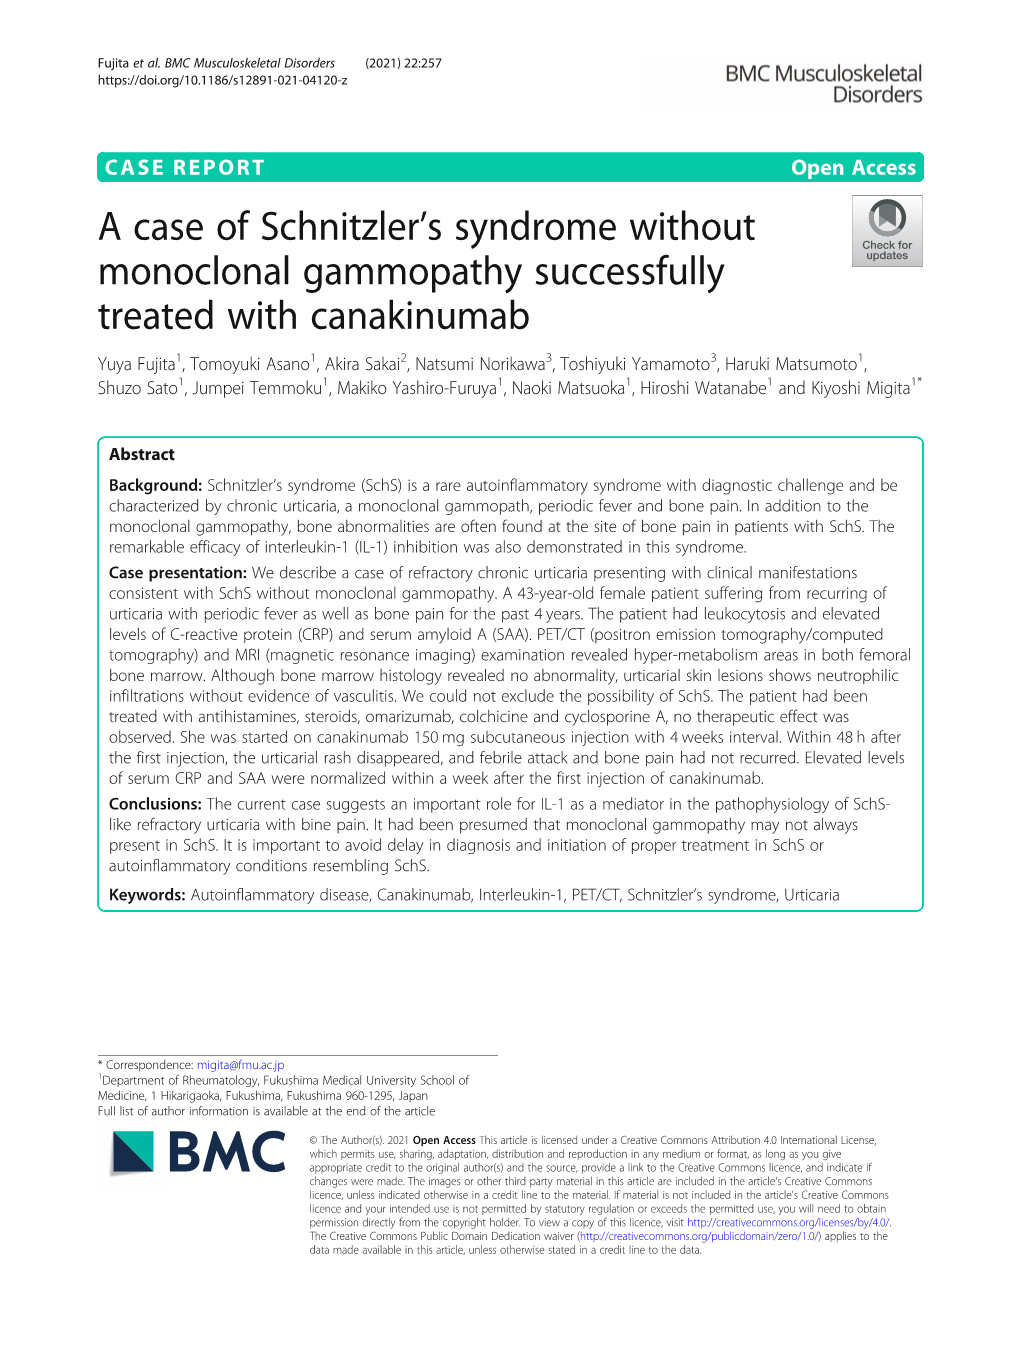 A Case of Schnitzler's Syndrome Without Monoclonal Gammopathy